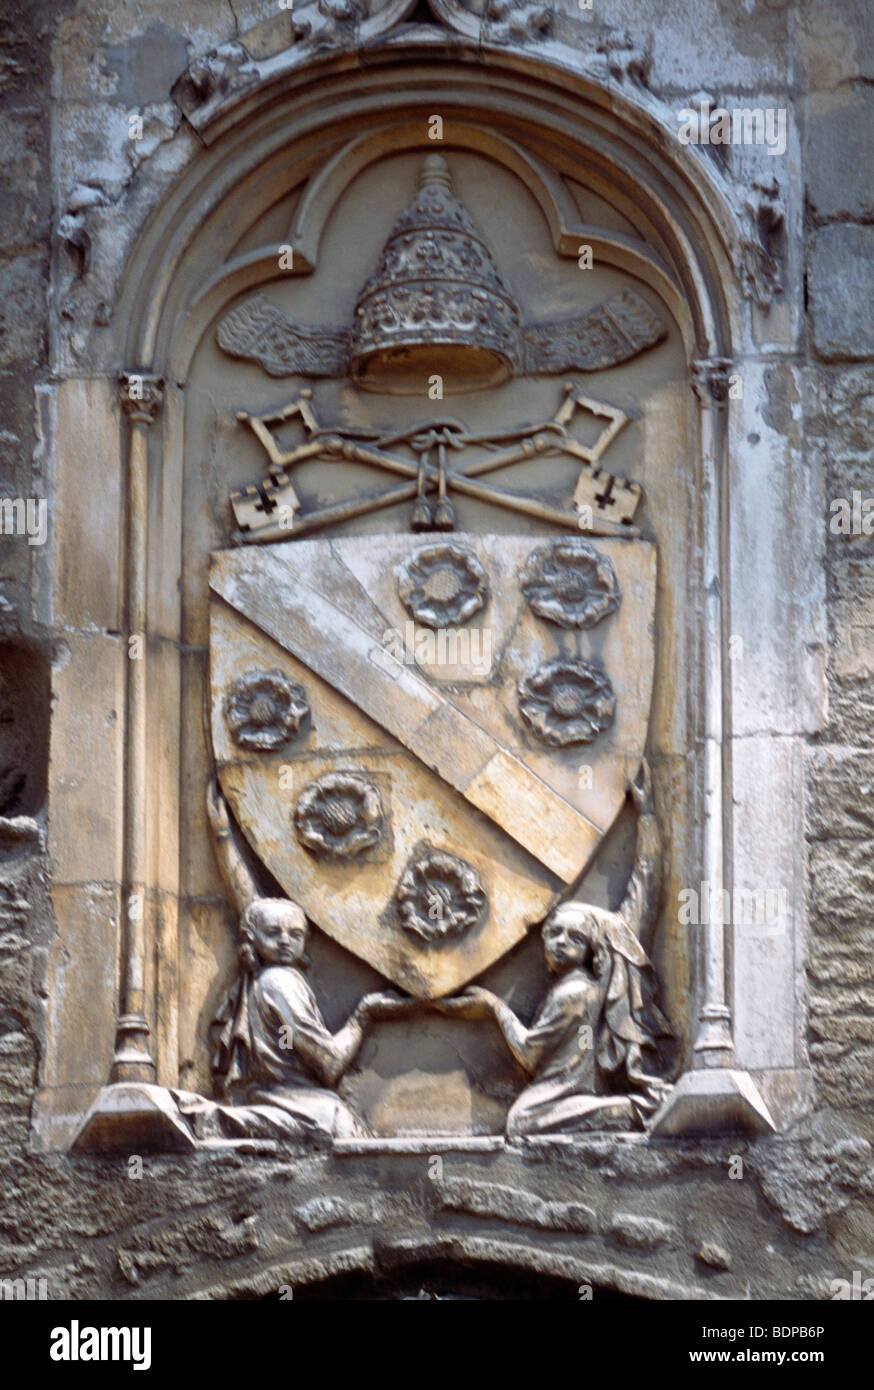 Avignon Provence France Palais des Papes Shield with Crossed Keys on Front of Building Stock Photo